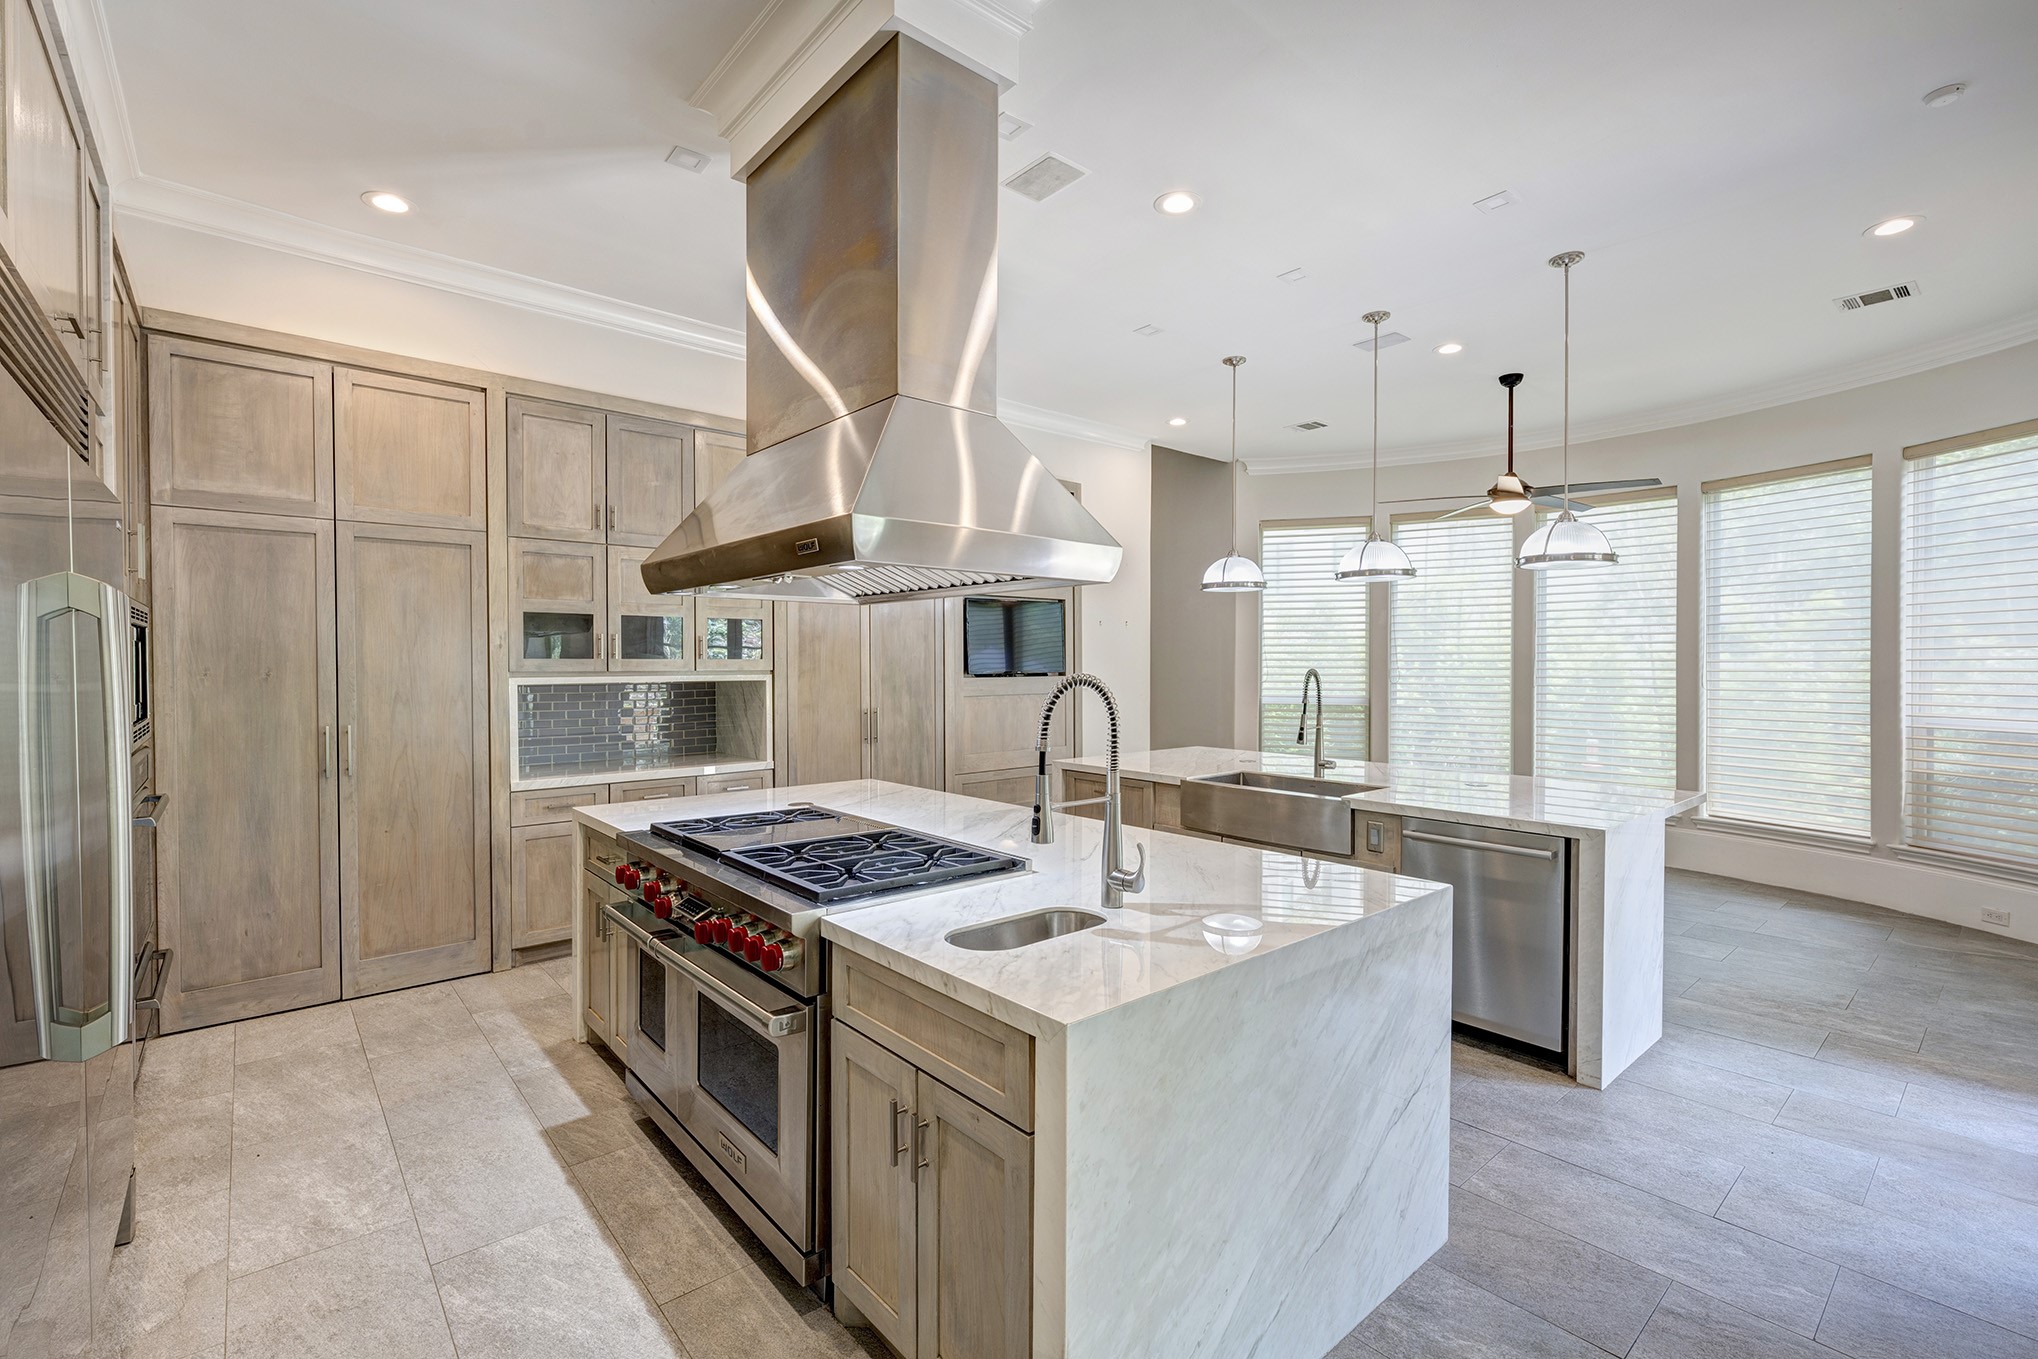 Gourmet kitchen includes two oversized islands, custom cabinets, three ovens, warming drawer, Wolf gas cooktop & grill and Electrolux Refrigerator & Freezer.